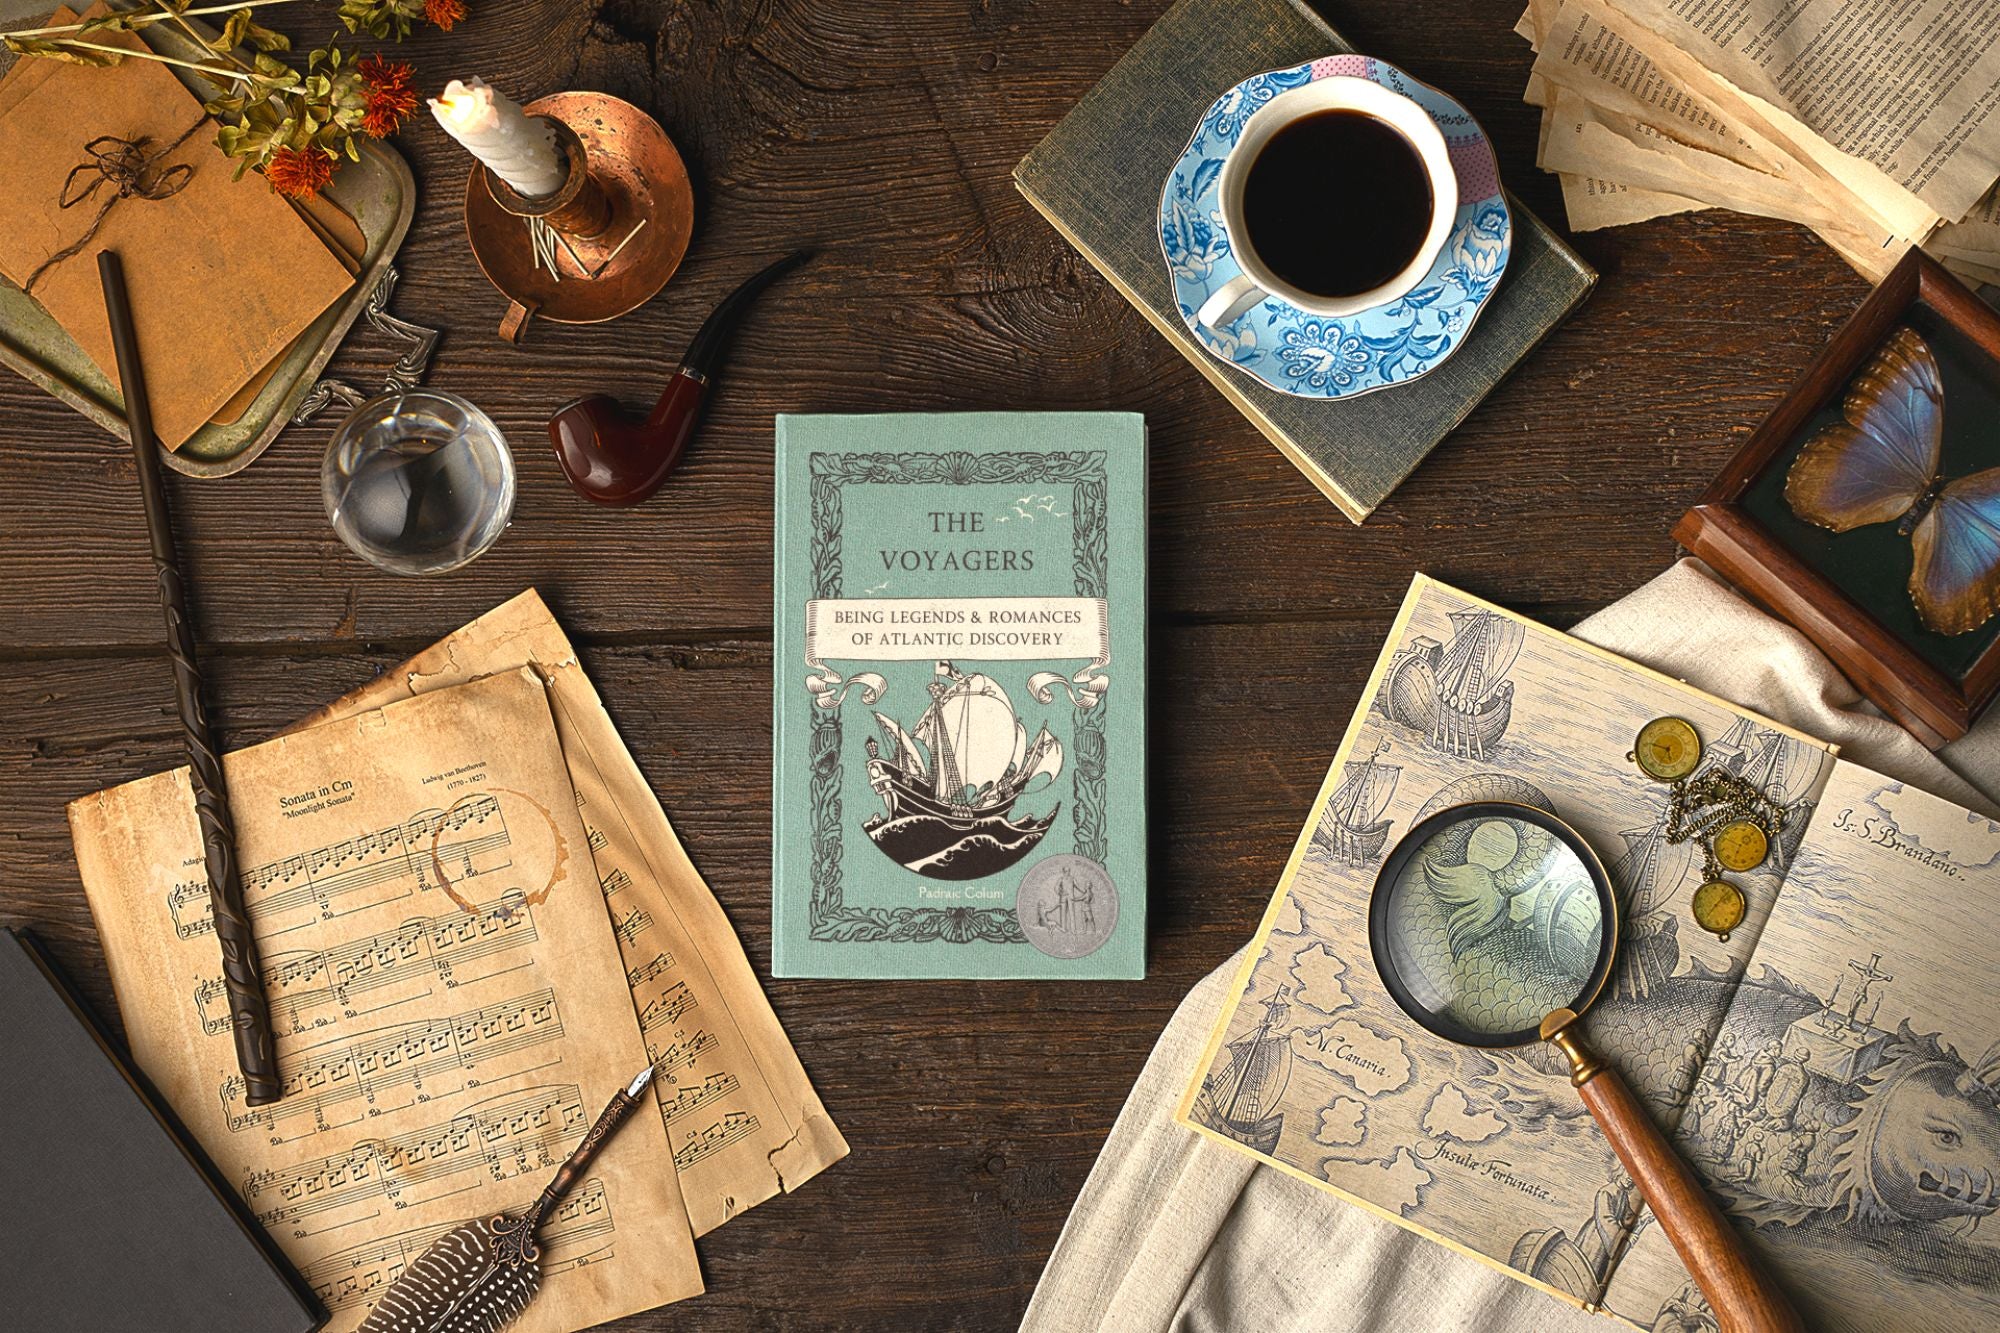 A dark wooden table holds old papers, vintage books, a blue china teacup and saucer, and a feather pen near a candle and a magic wand. In the center is The Voyagers by Padraic Colum.